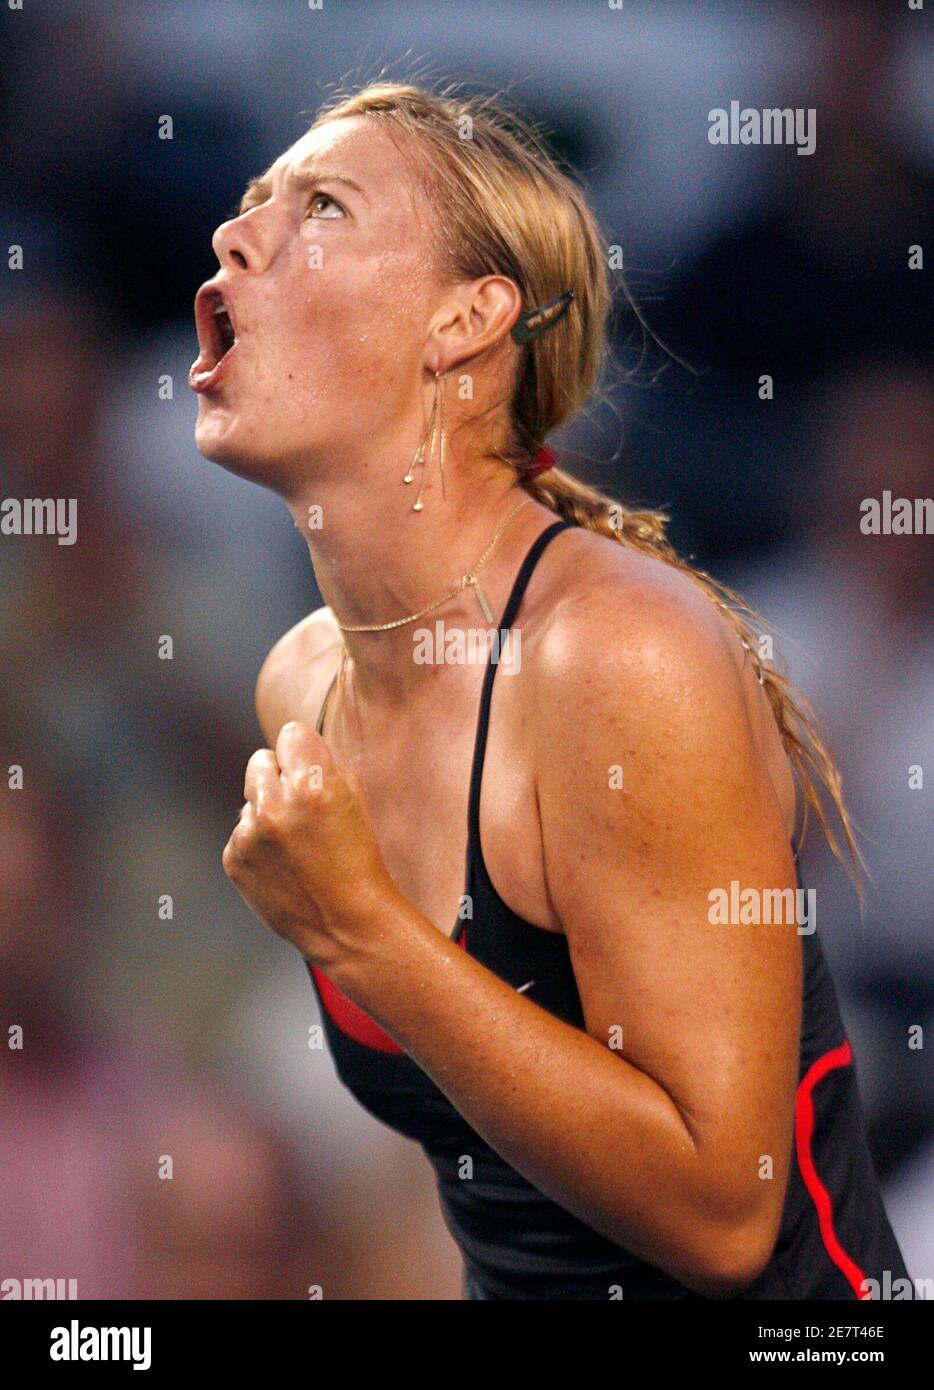 Russia's Maria Sharapova celebrates holding her serve against compatriot Vasilisa Bardina during their match at the 2006 Acura Classic women's tennis tournament in Carlsbad, California, August 1, 2006.   REUTERS/Mike Blake(UNITED STATES) Stock Photo